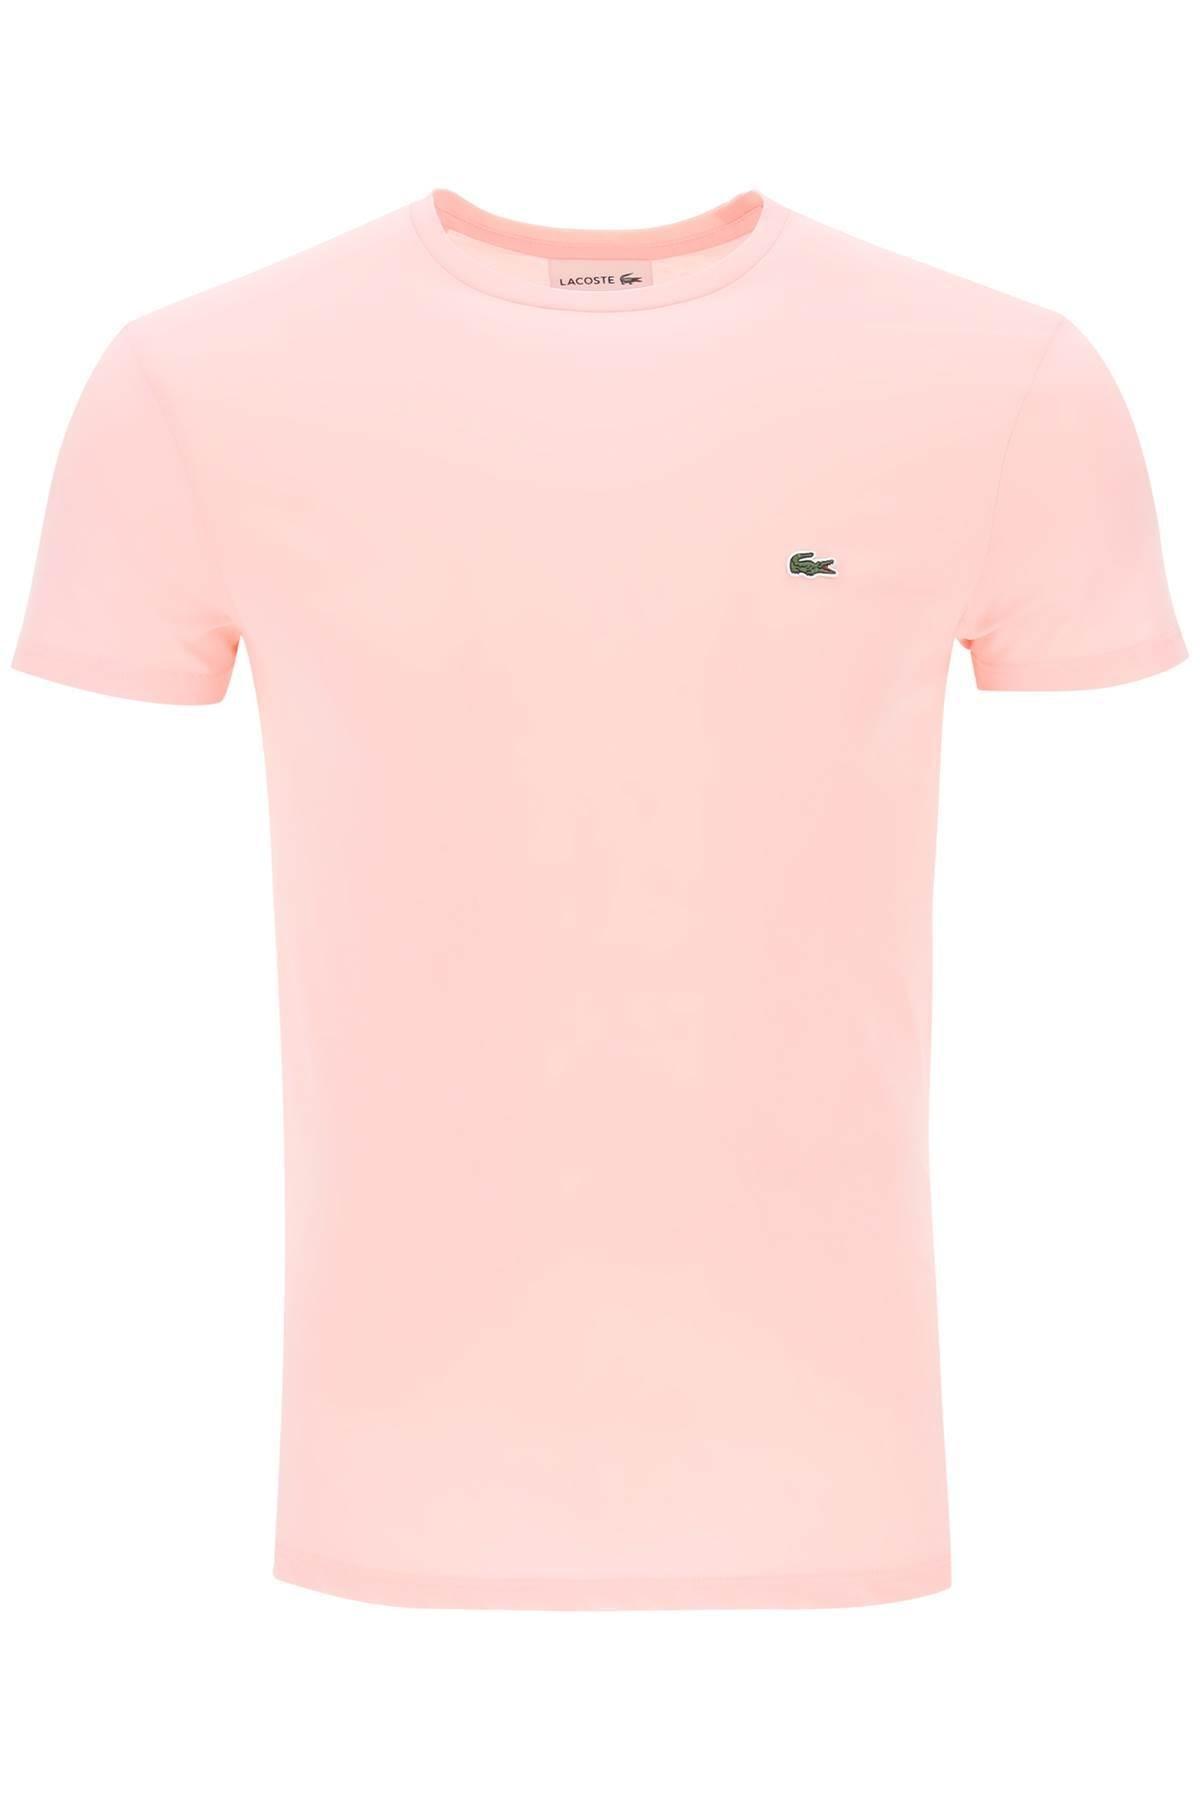 Lacoste Logo T Shirt in Pink for Men | Lyst